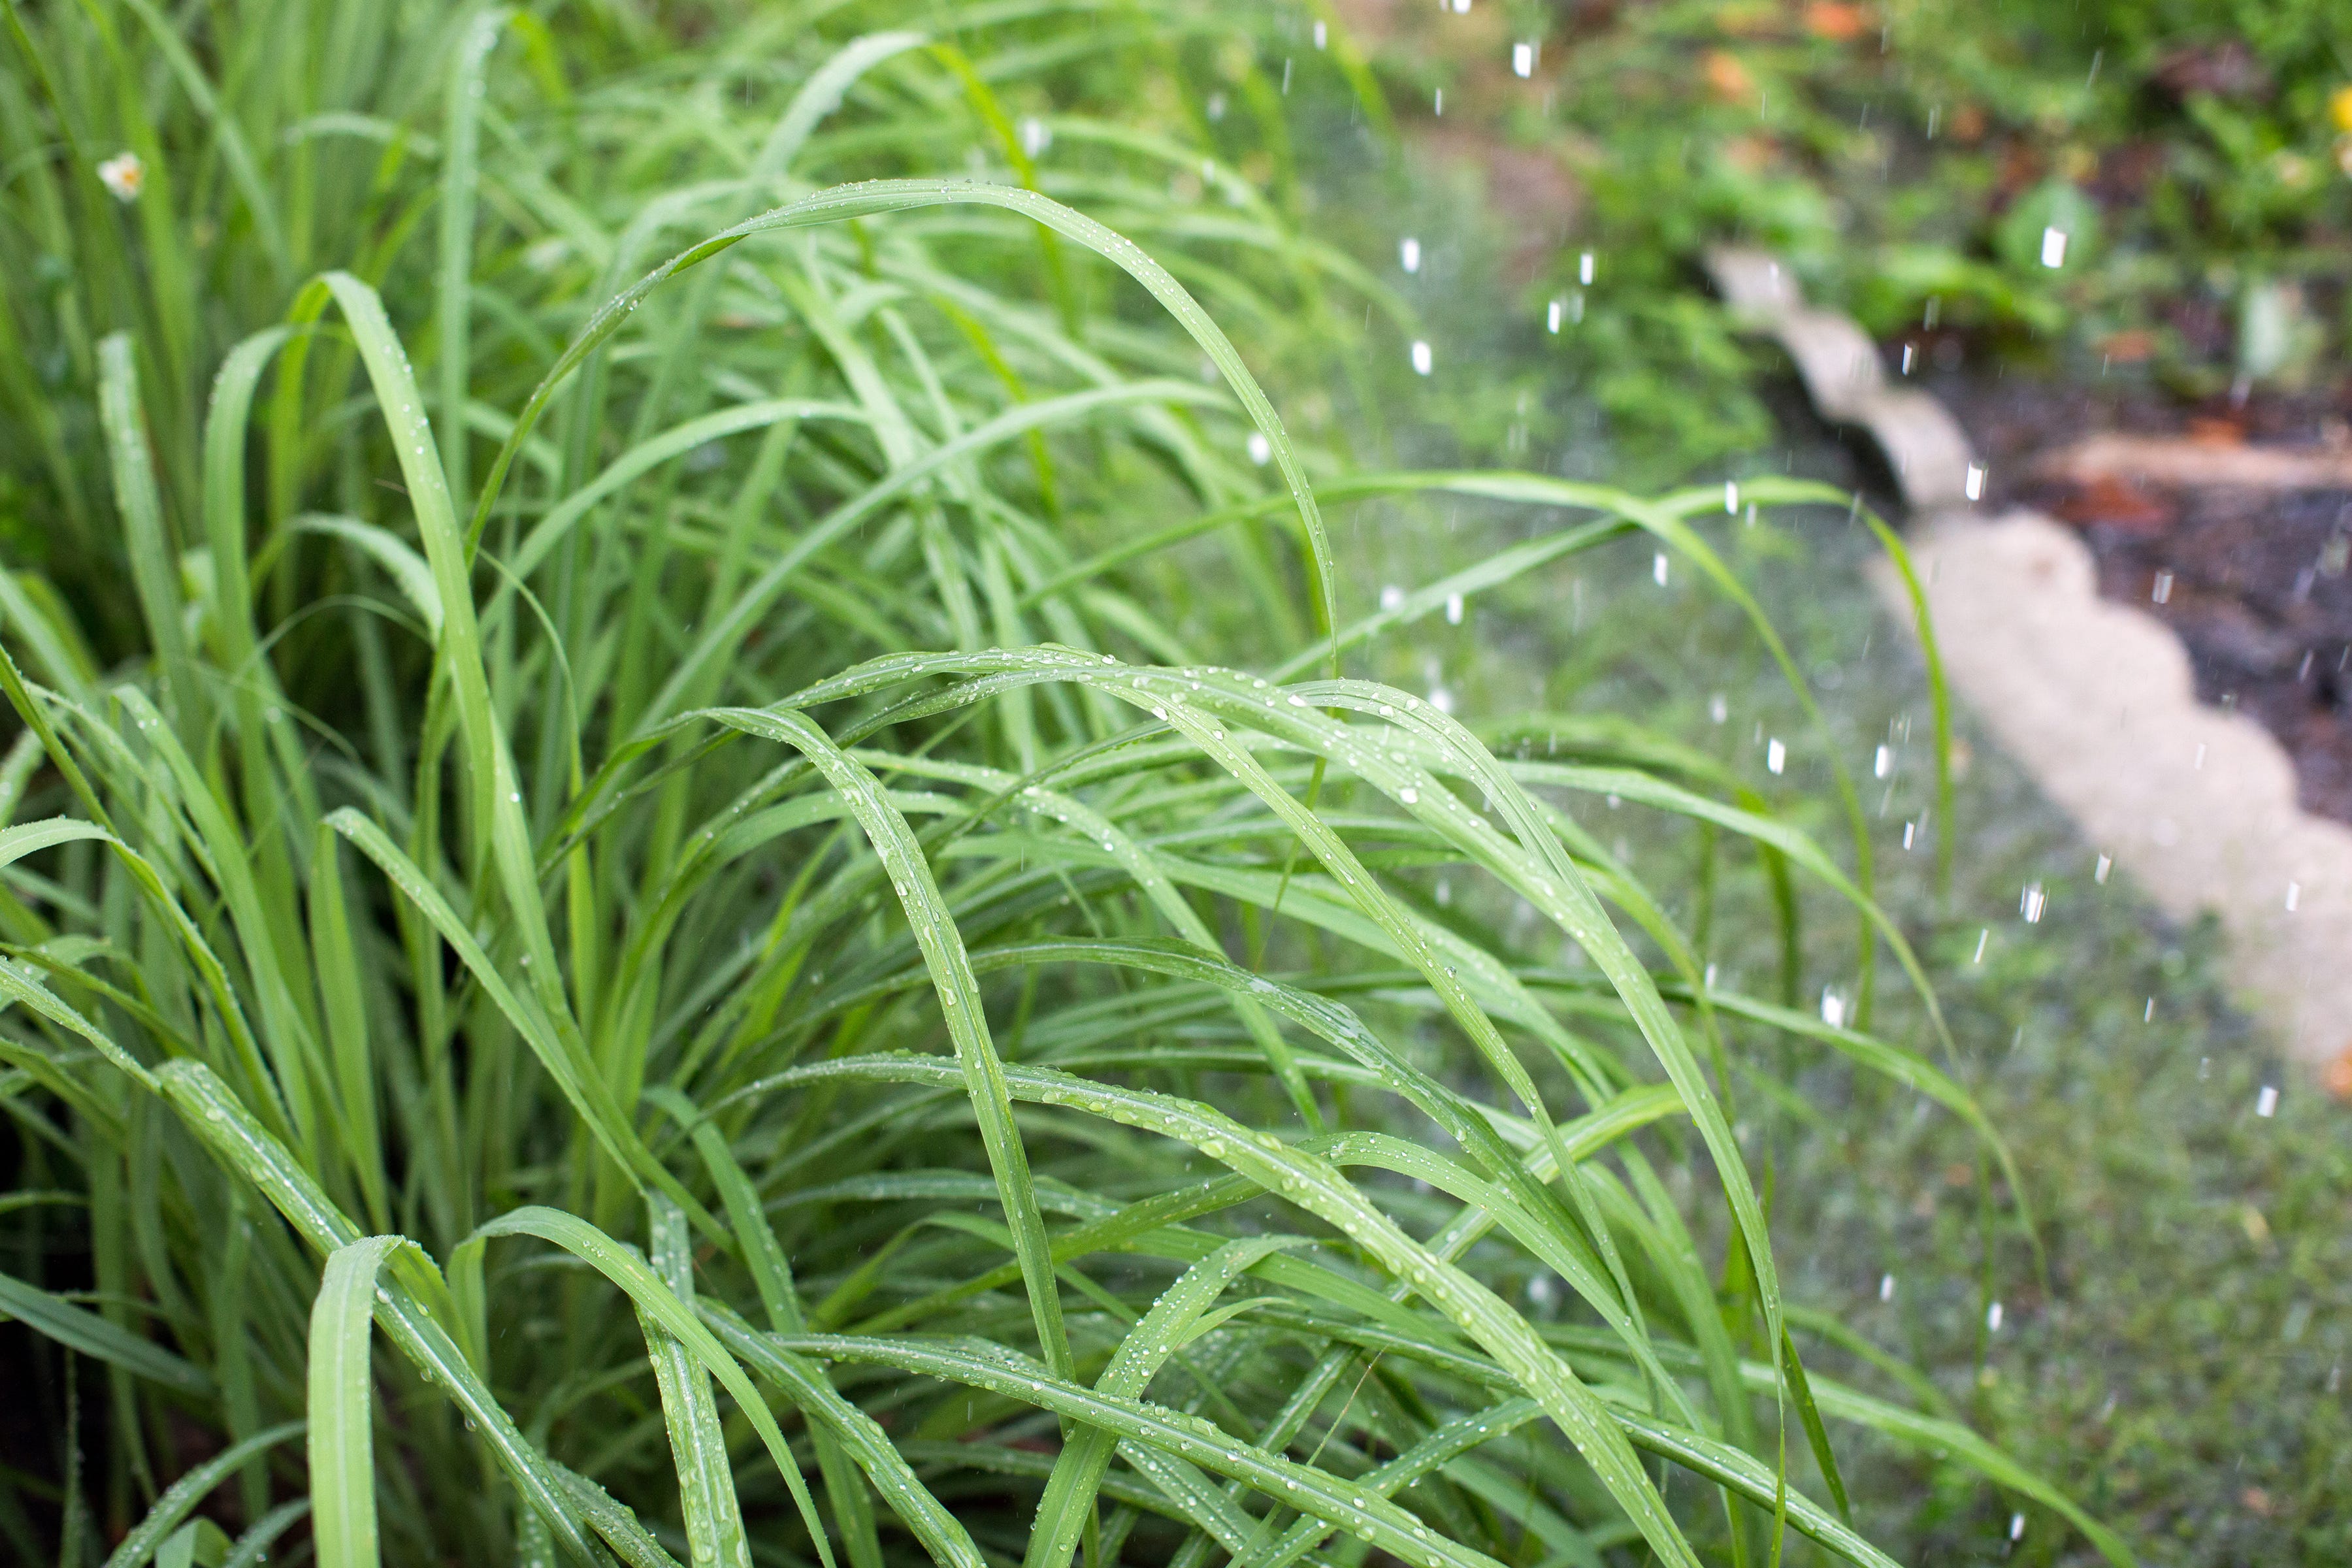 Lemongrass getting rain while background shows flooding in front yard.